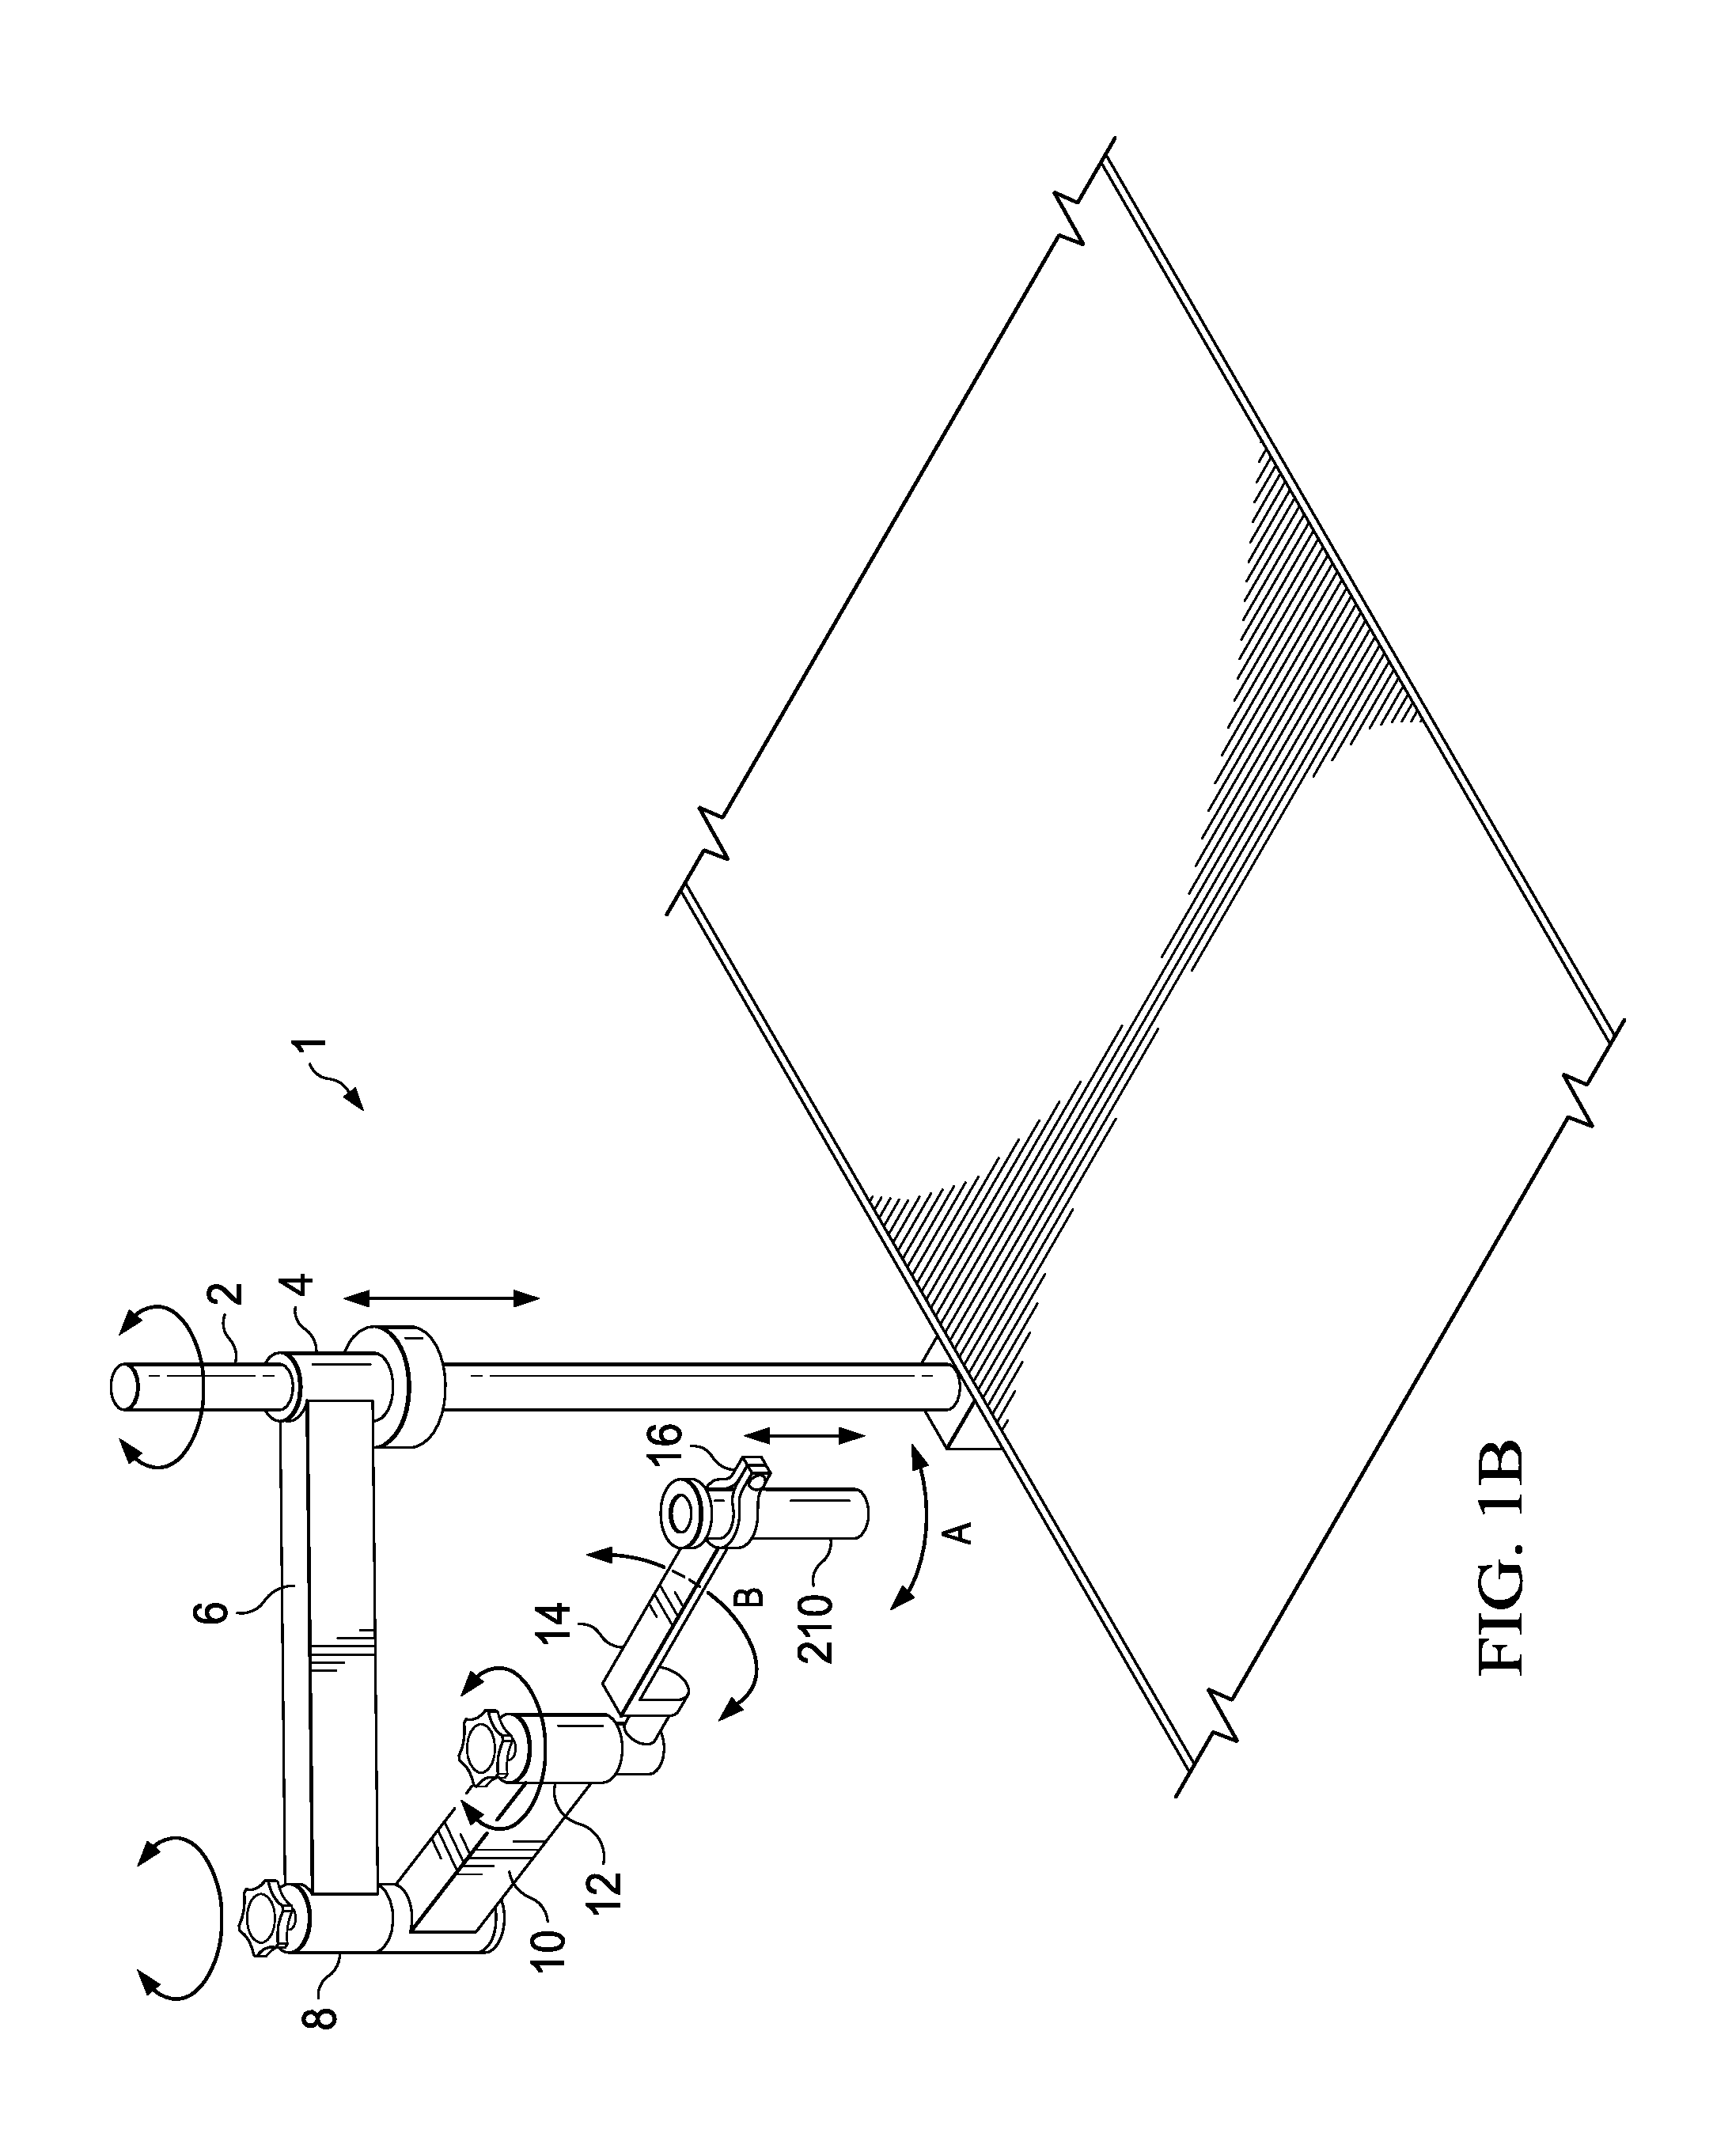 Robotic Devices and Systems for Performing Single Incision Procedures and Natural Orifice Translumenal Endoscopic Surgical Procedures, and Methods of Configuring Robotic Devices and Systems